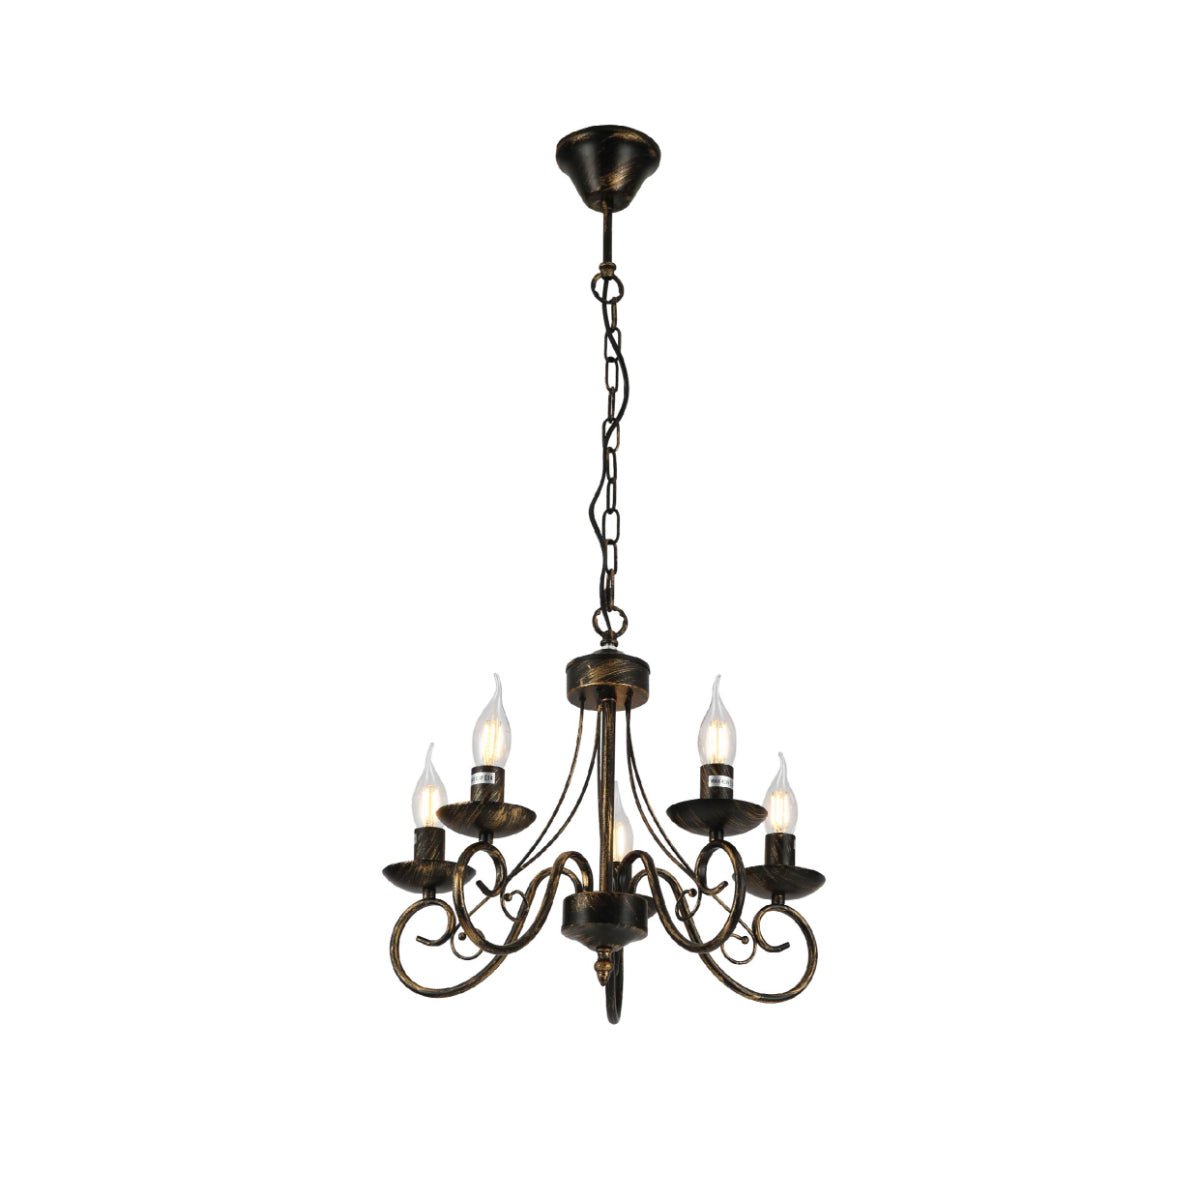 Main image of Candle Vintage Gold Patinated Black French Chandelier Ceiling Light 5xE14 | TEKLED 152-17615